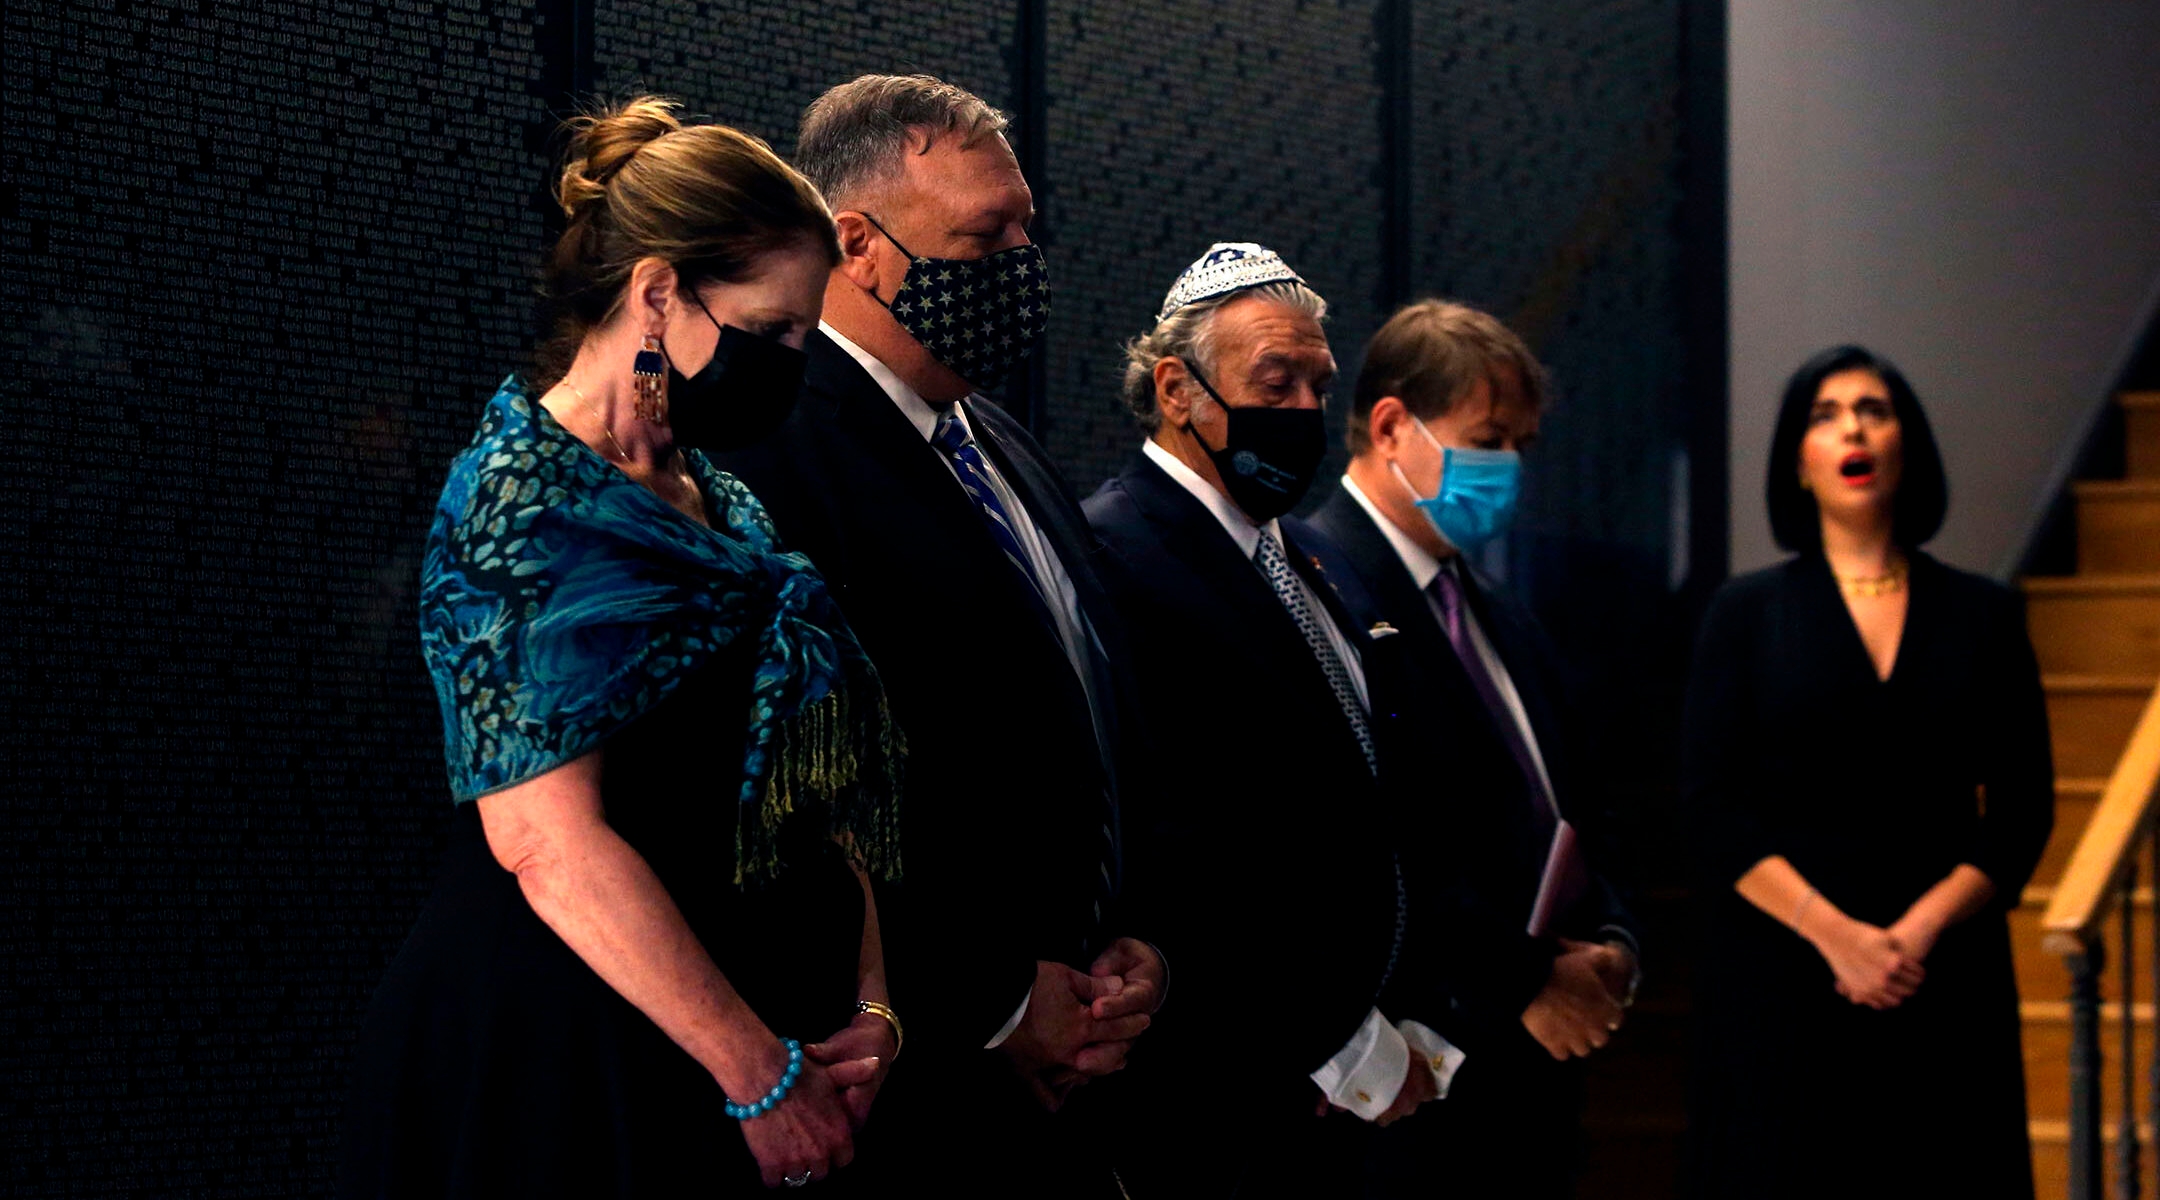 U.S. Secretary of State Mike Pompeo and his wife, Susan, left, visit the Jewish Museum of Thessaloniki, Greece with members of the local Jewish community on Sept. 28, 2020. (Giannis Papanikos/AFP via Getty Images)